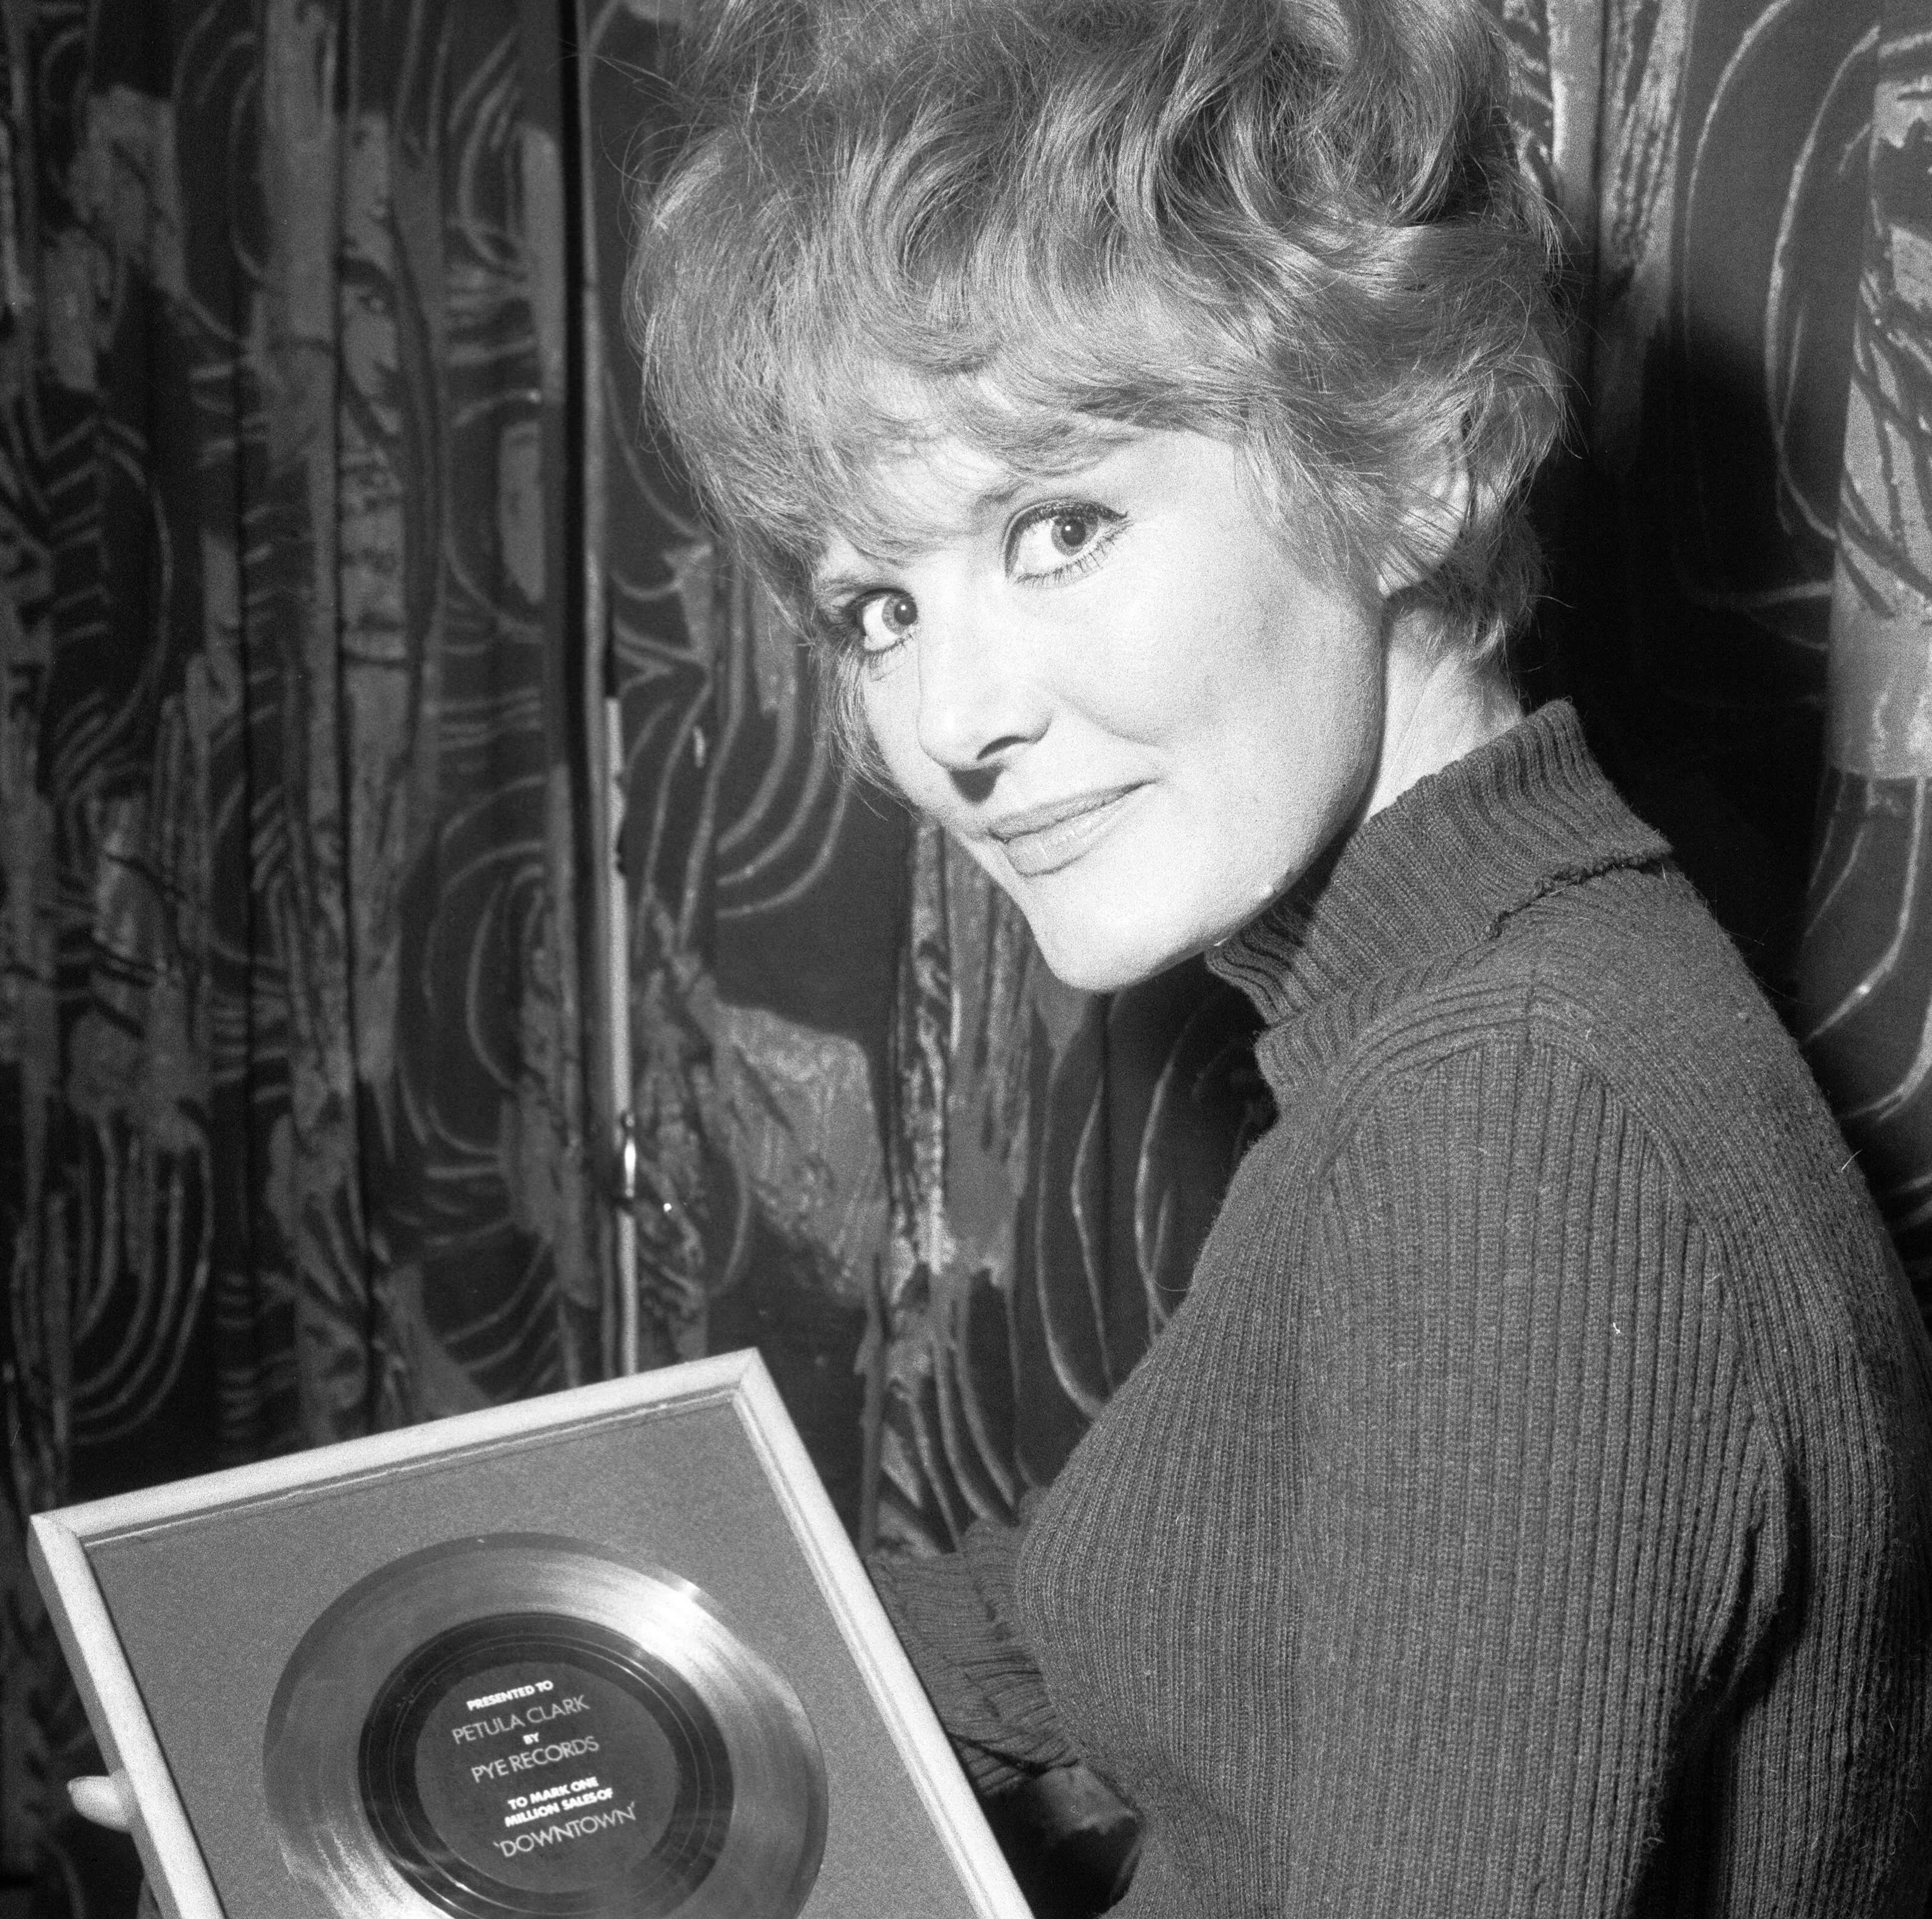 "Don't Sleep in the Subway" singer Petula Clark holding a record